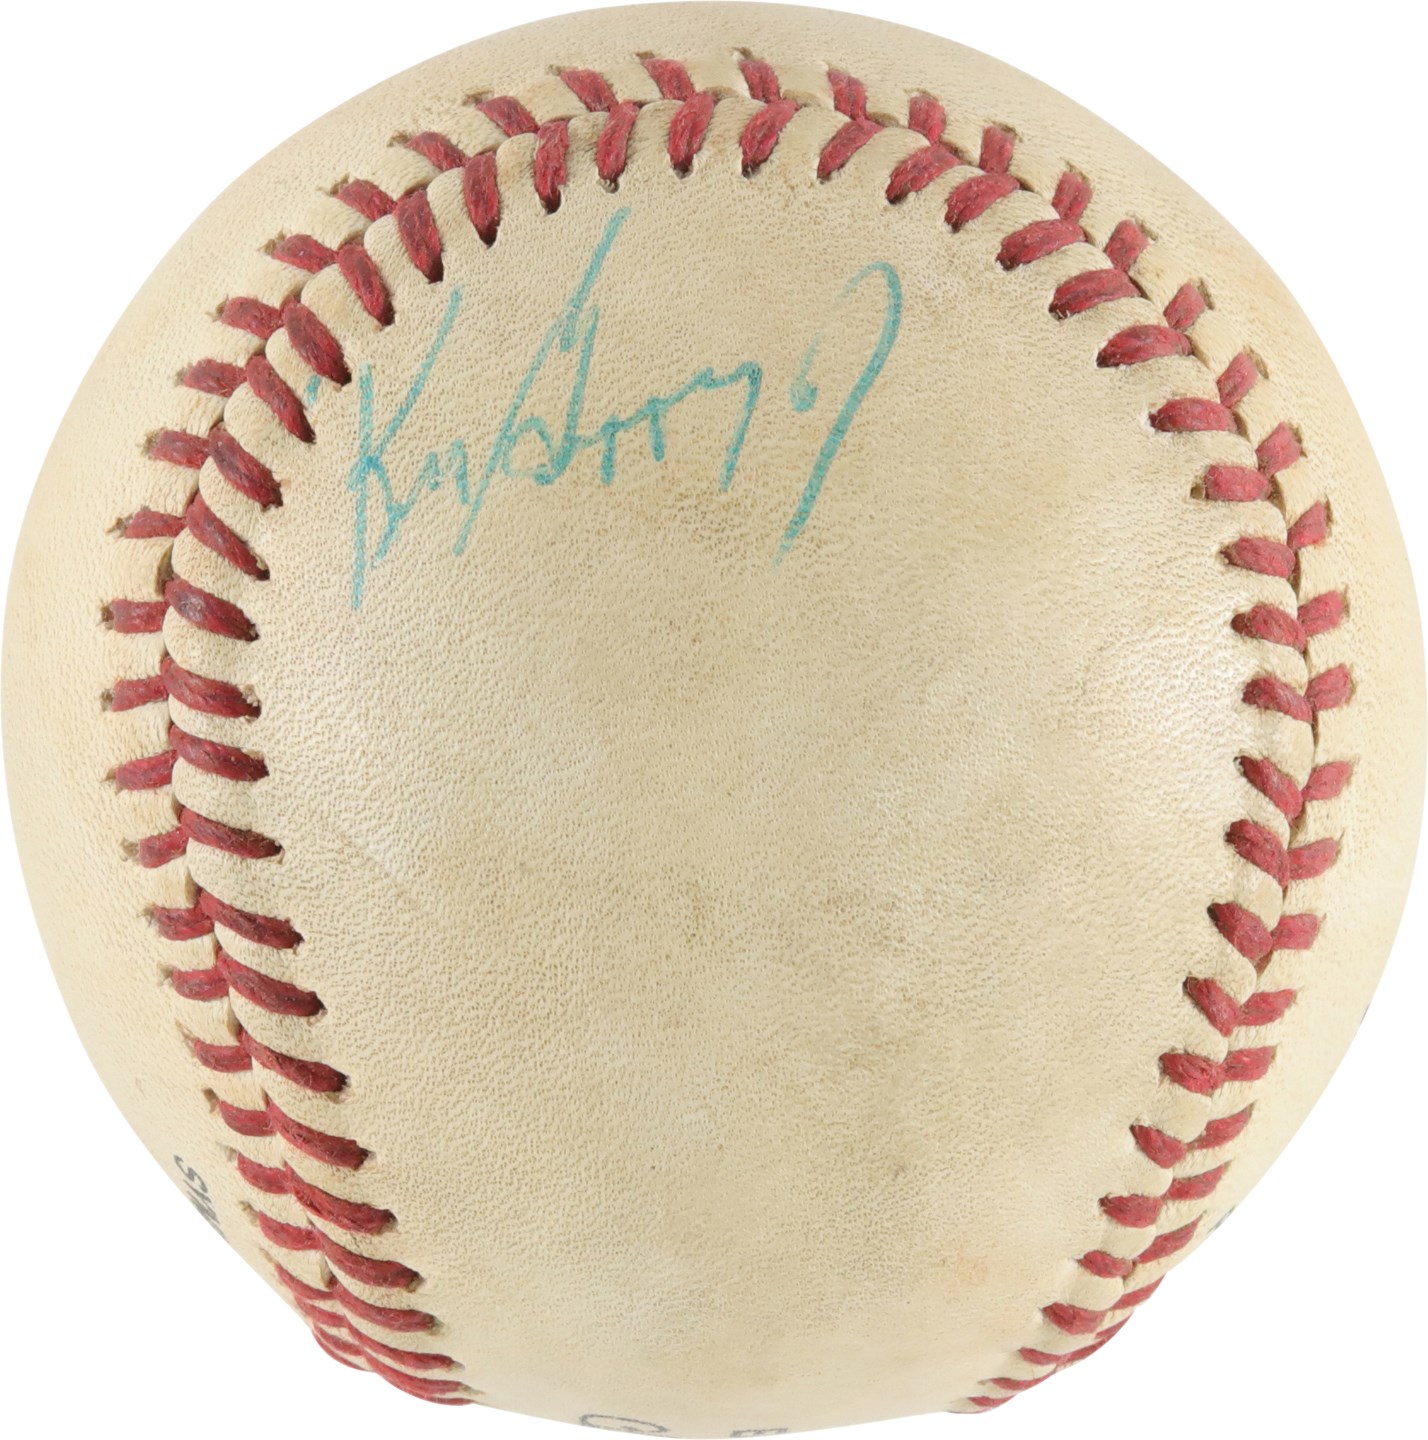 - 1988 Ken Griffey Jr Signed Game Used Baseball Attributed to First Home Run with Vermont Mariners